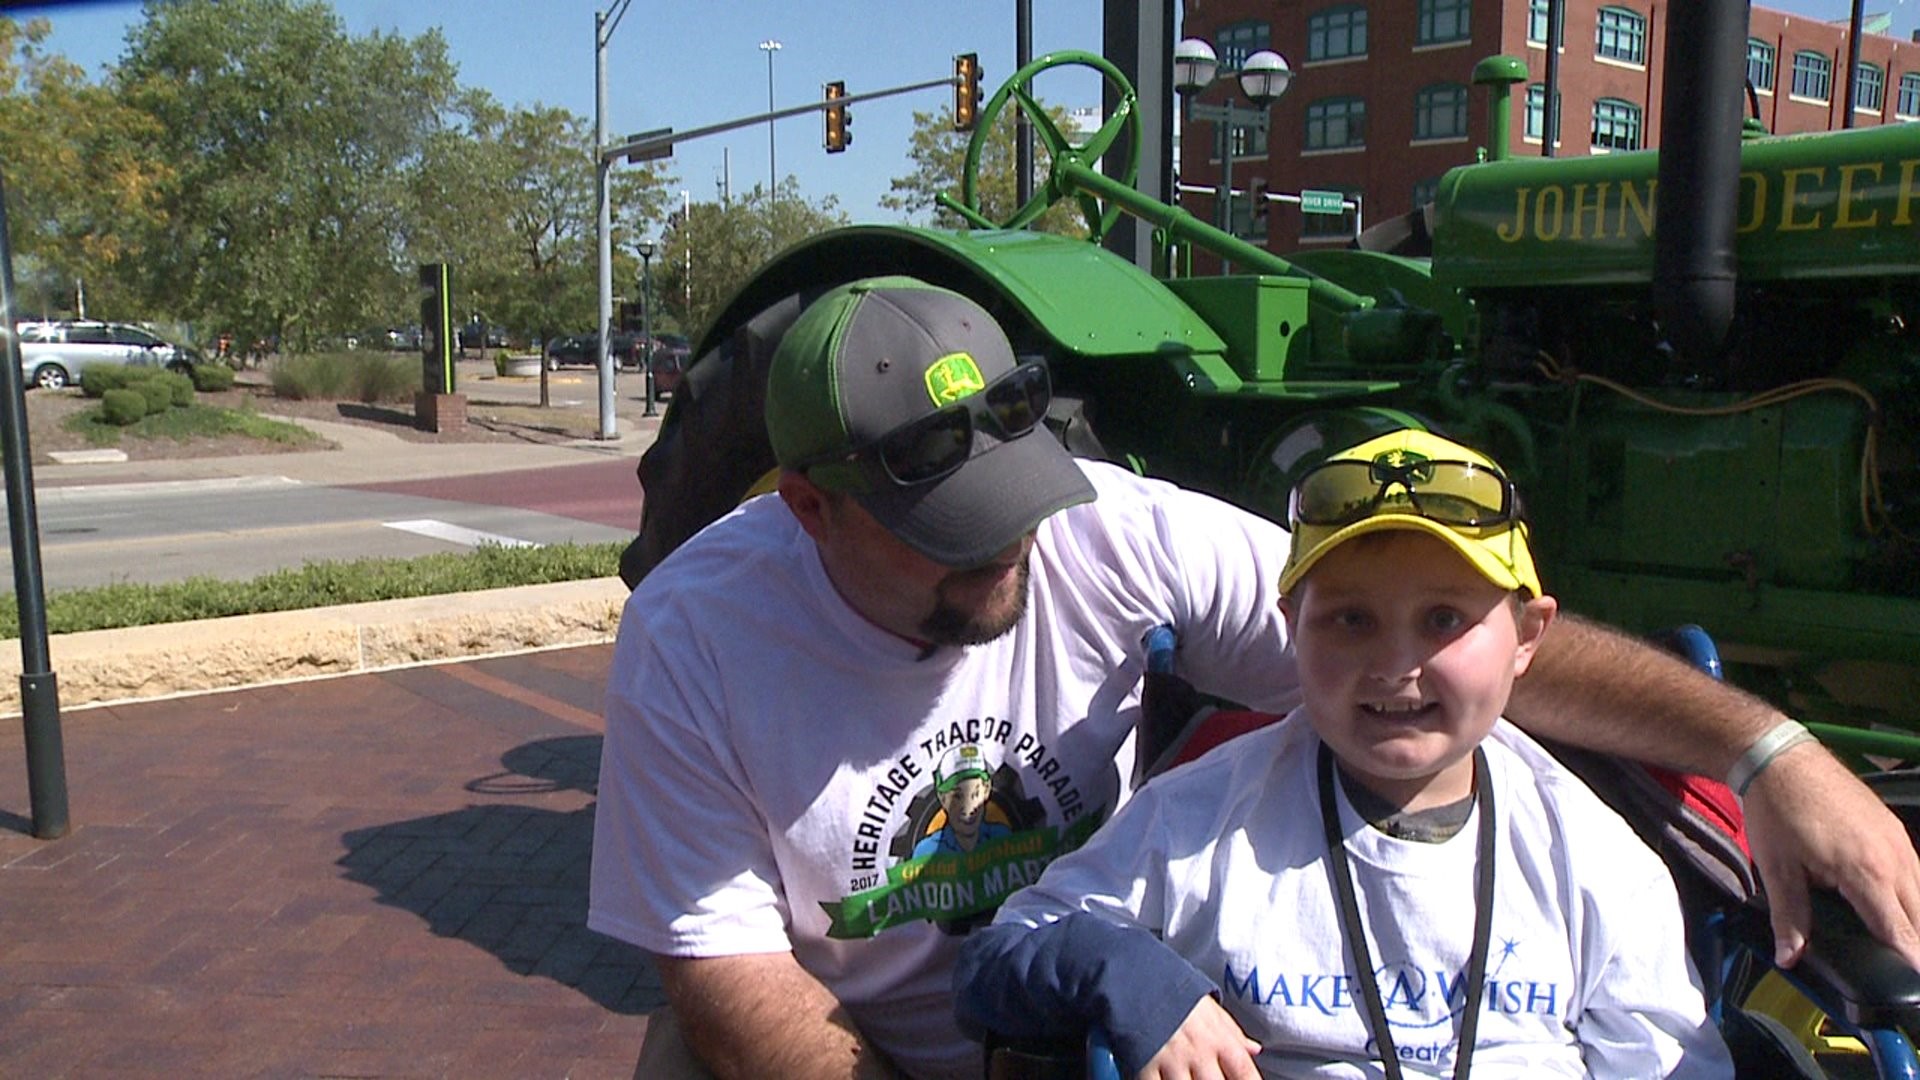 Make a wish child leads tractor parade